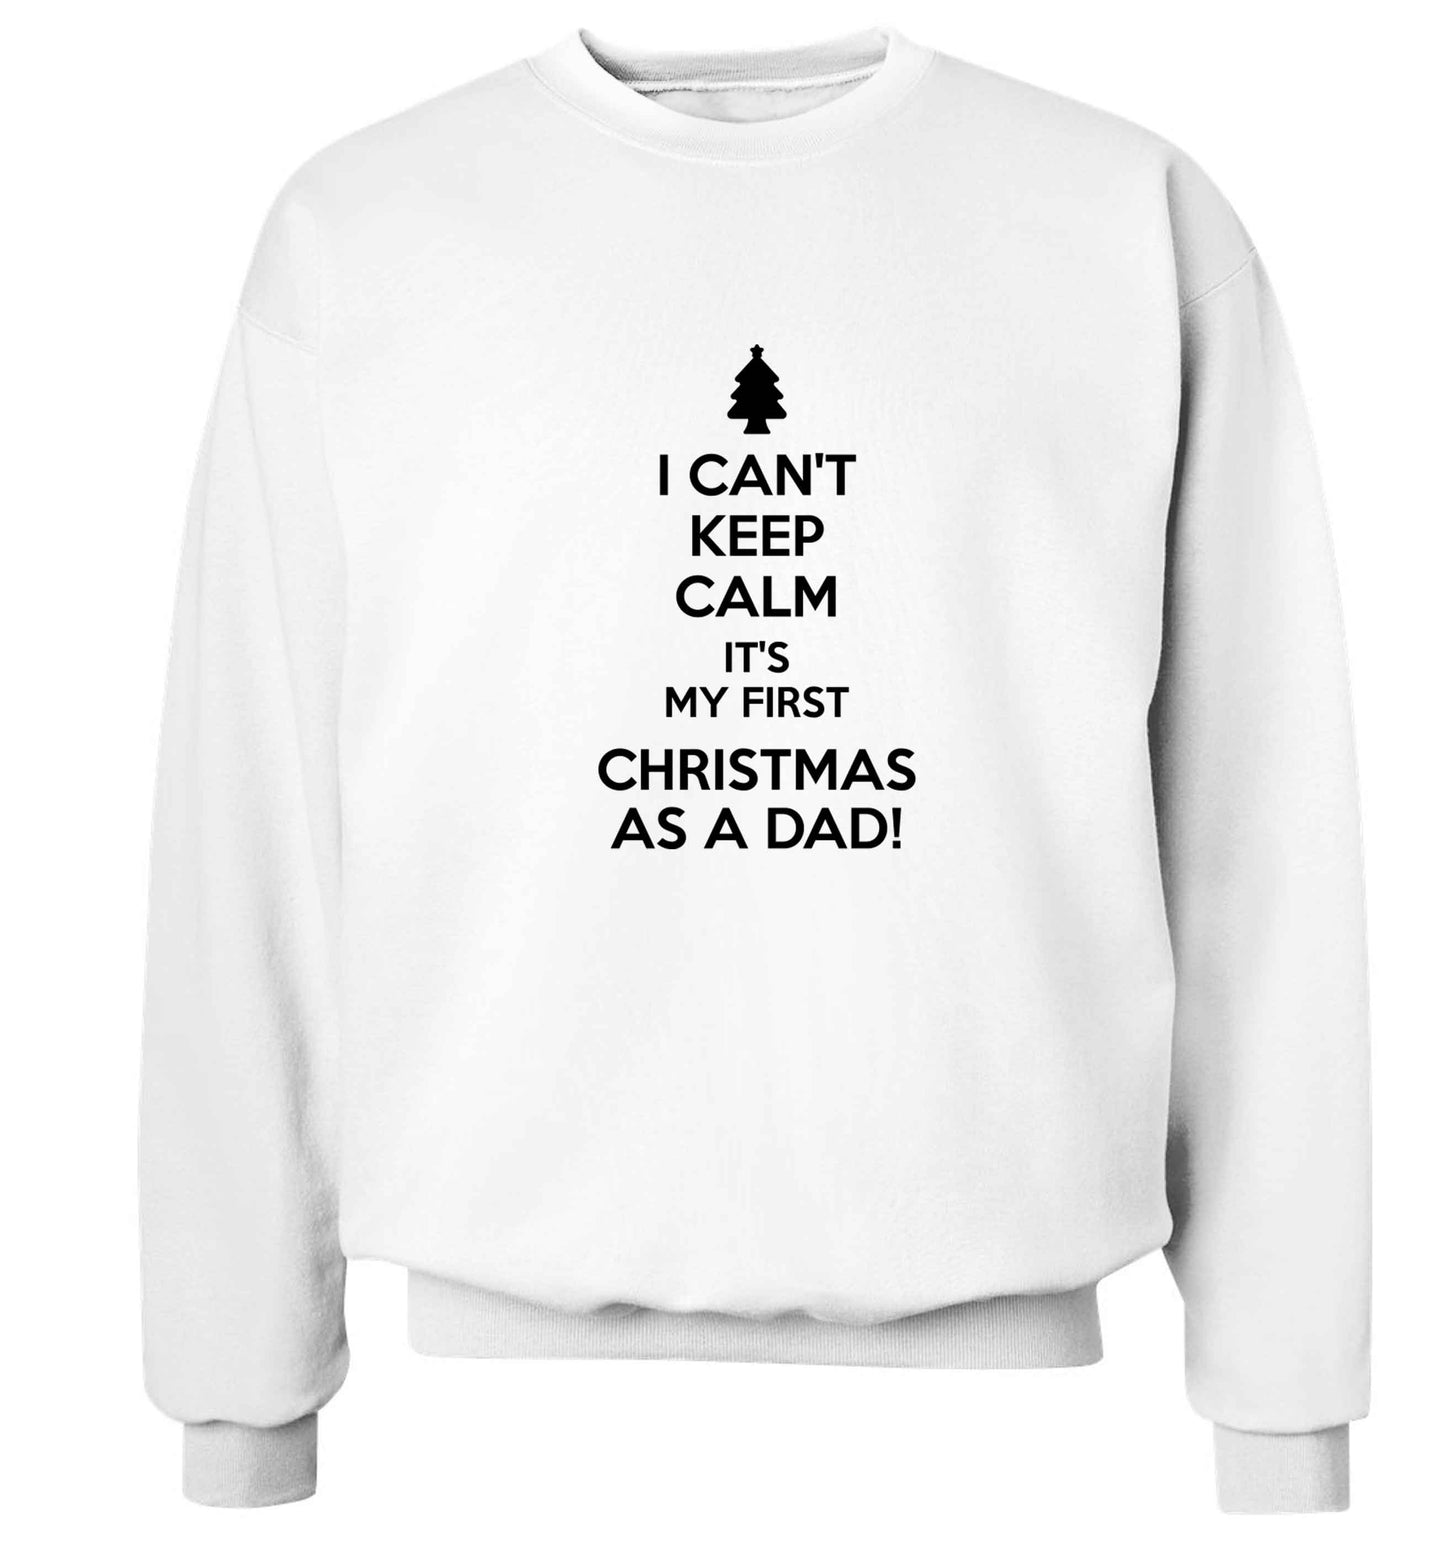 I can't keep calm it's my first Christmas as a dad Adult's unisex white Sweater 2XL